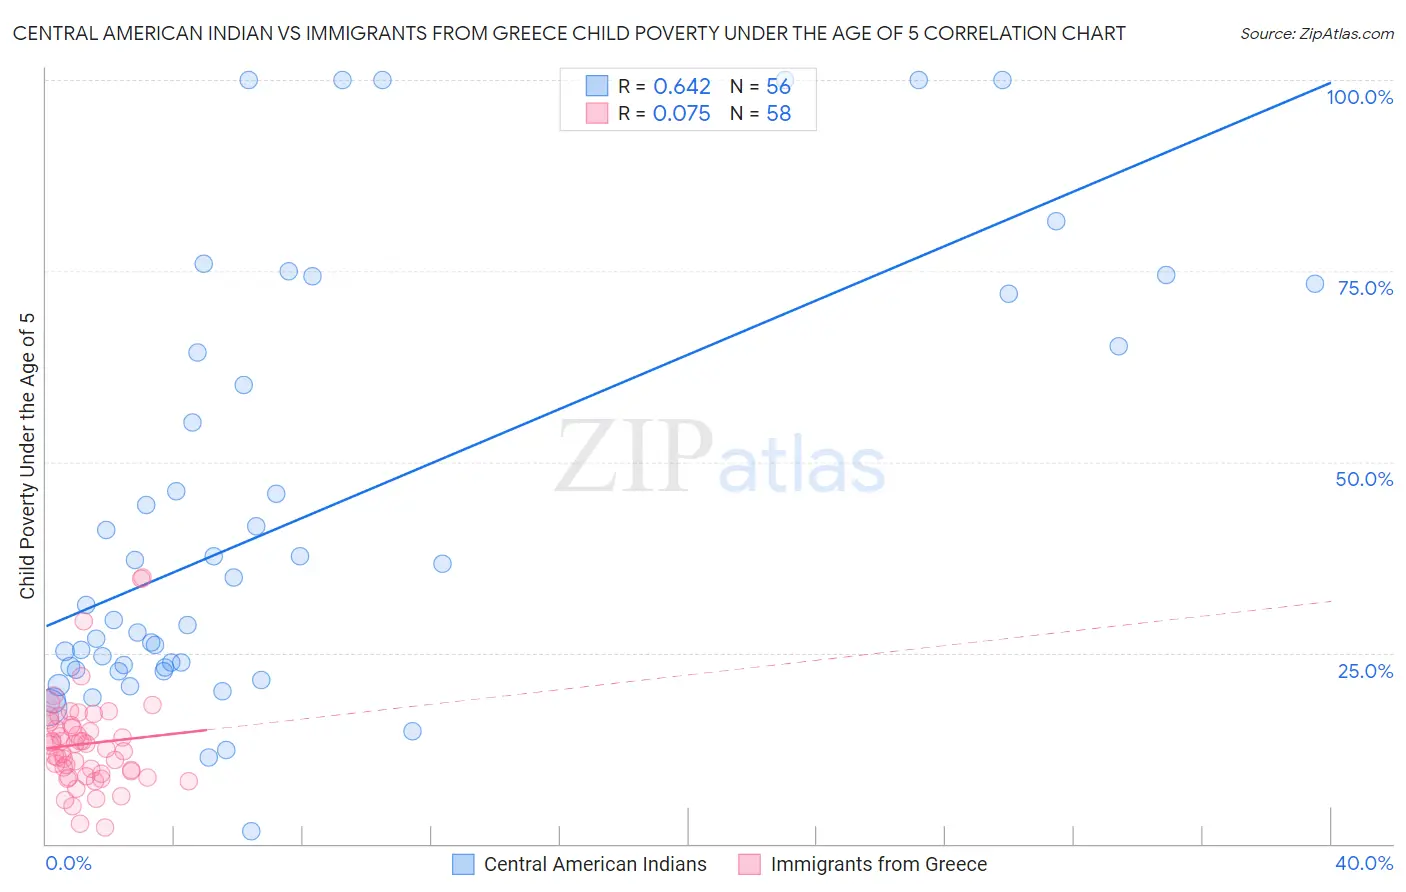 Central American Indian vs Immigrants from Greece Child Poverty Under the Age of 5